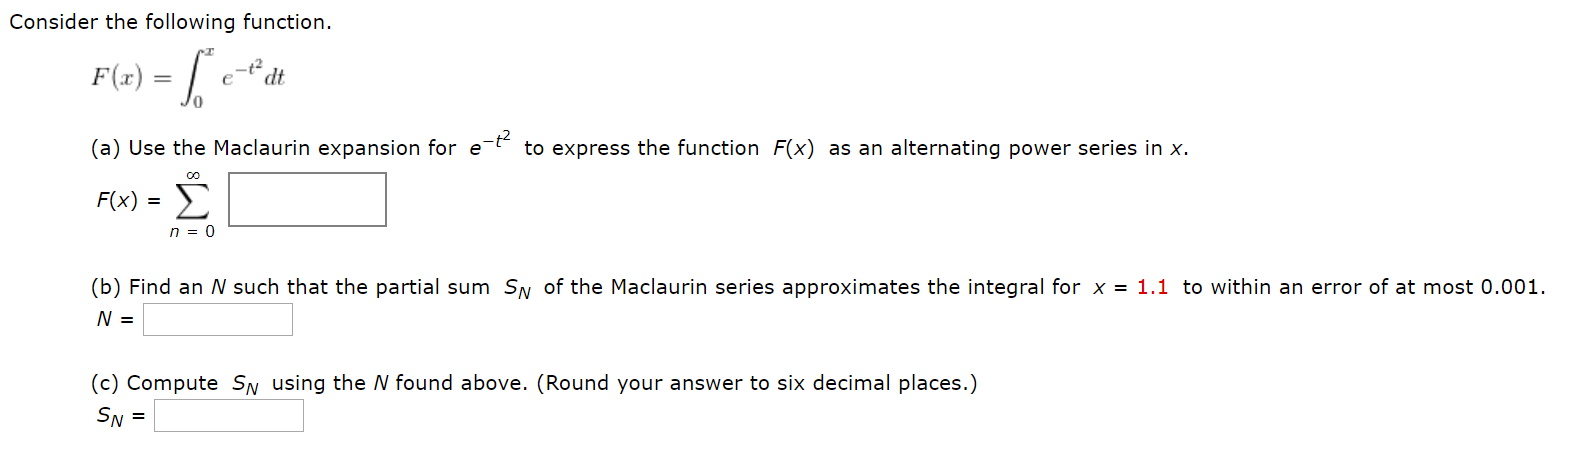 Consider the following function.
F(x) =
P1-
(a) Use the Maclaurin expansion for e t to express the function F(x) as an alternating power series in x.
F(x) = >
n = 0
(b) Find an N such that the partial sum SN of the Maclaurin series approximates the integral for x = 1.1 to within an error of at most 0.001.
(c) Compute SN using the N found above. (Round your answer to six decimal places.)
SN =
